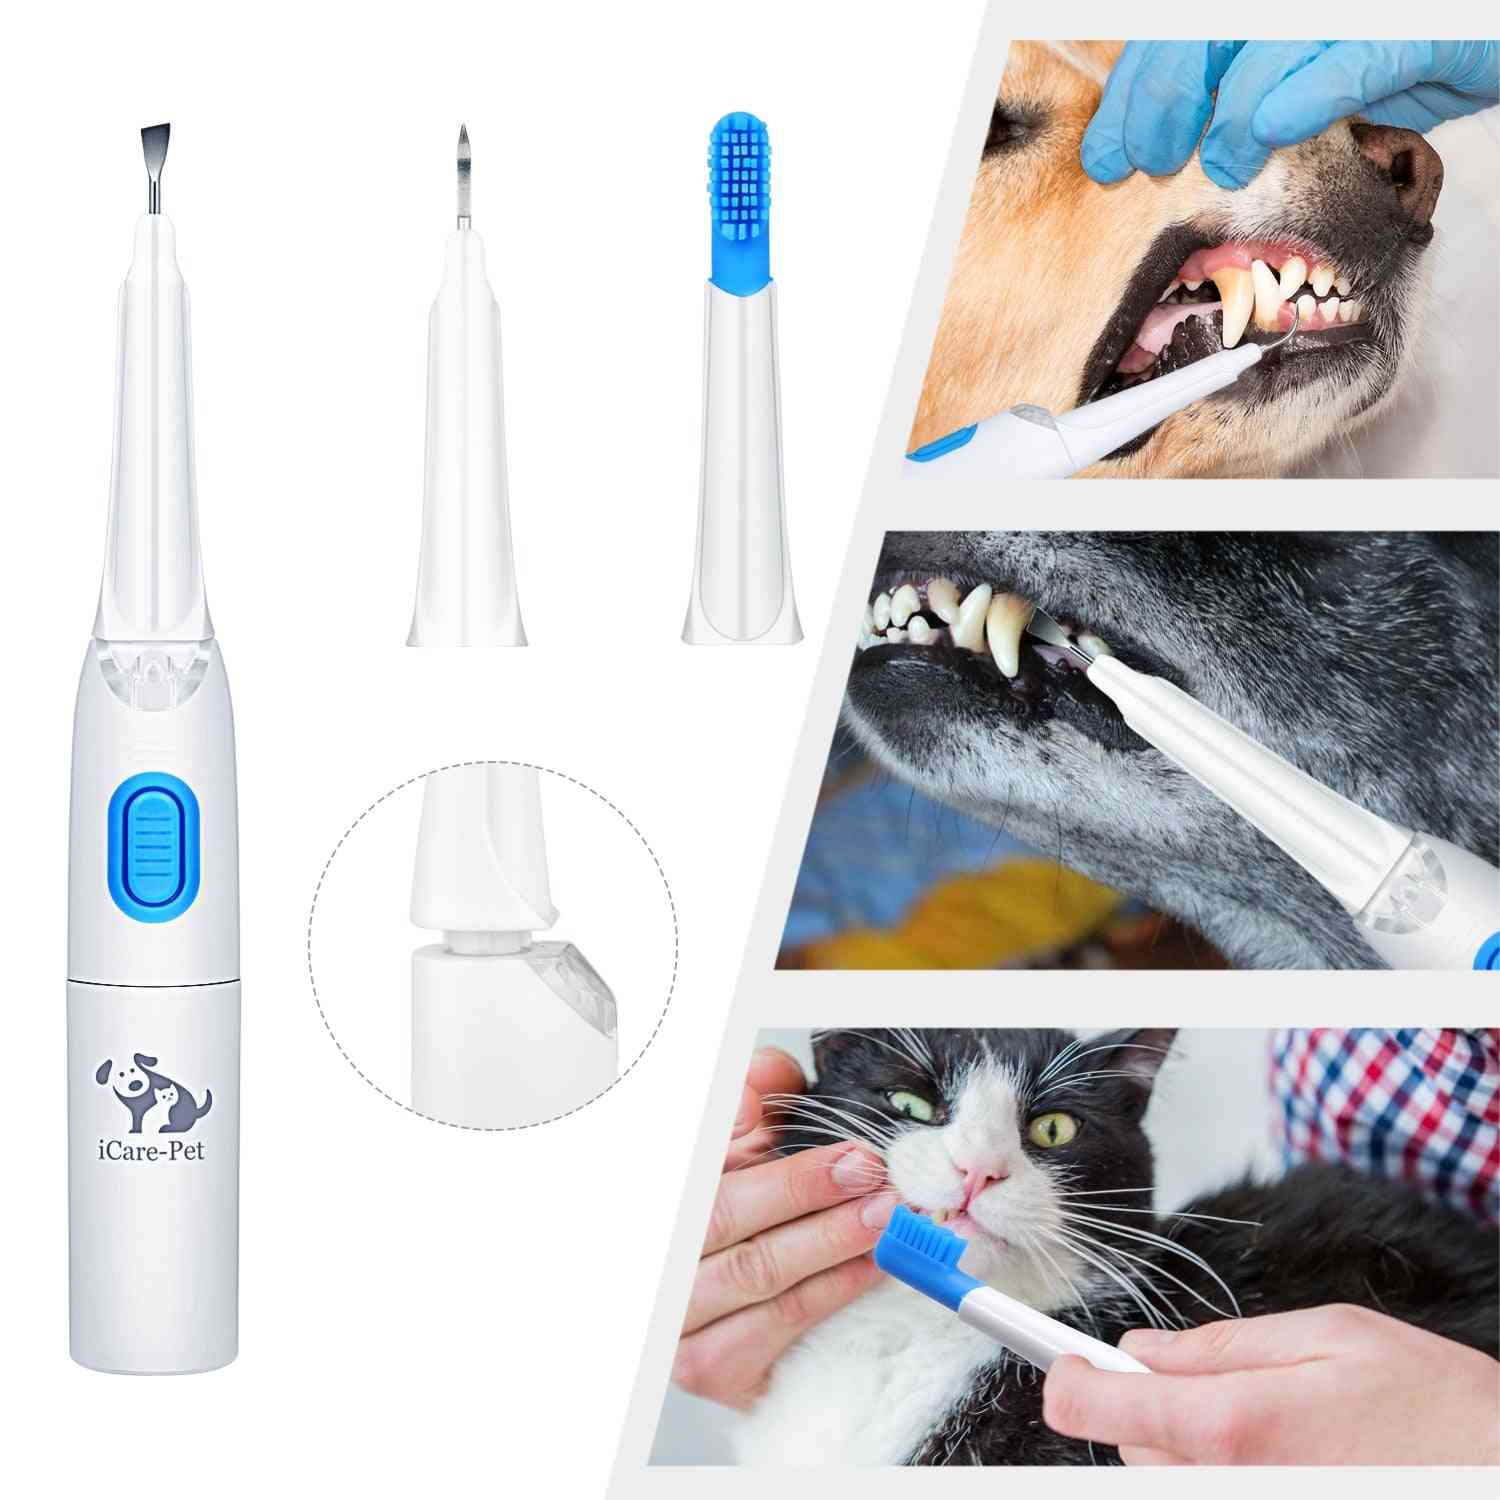 Ultrasonic Dental Calculus Remover Toothbrush For Pets